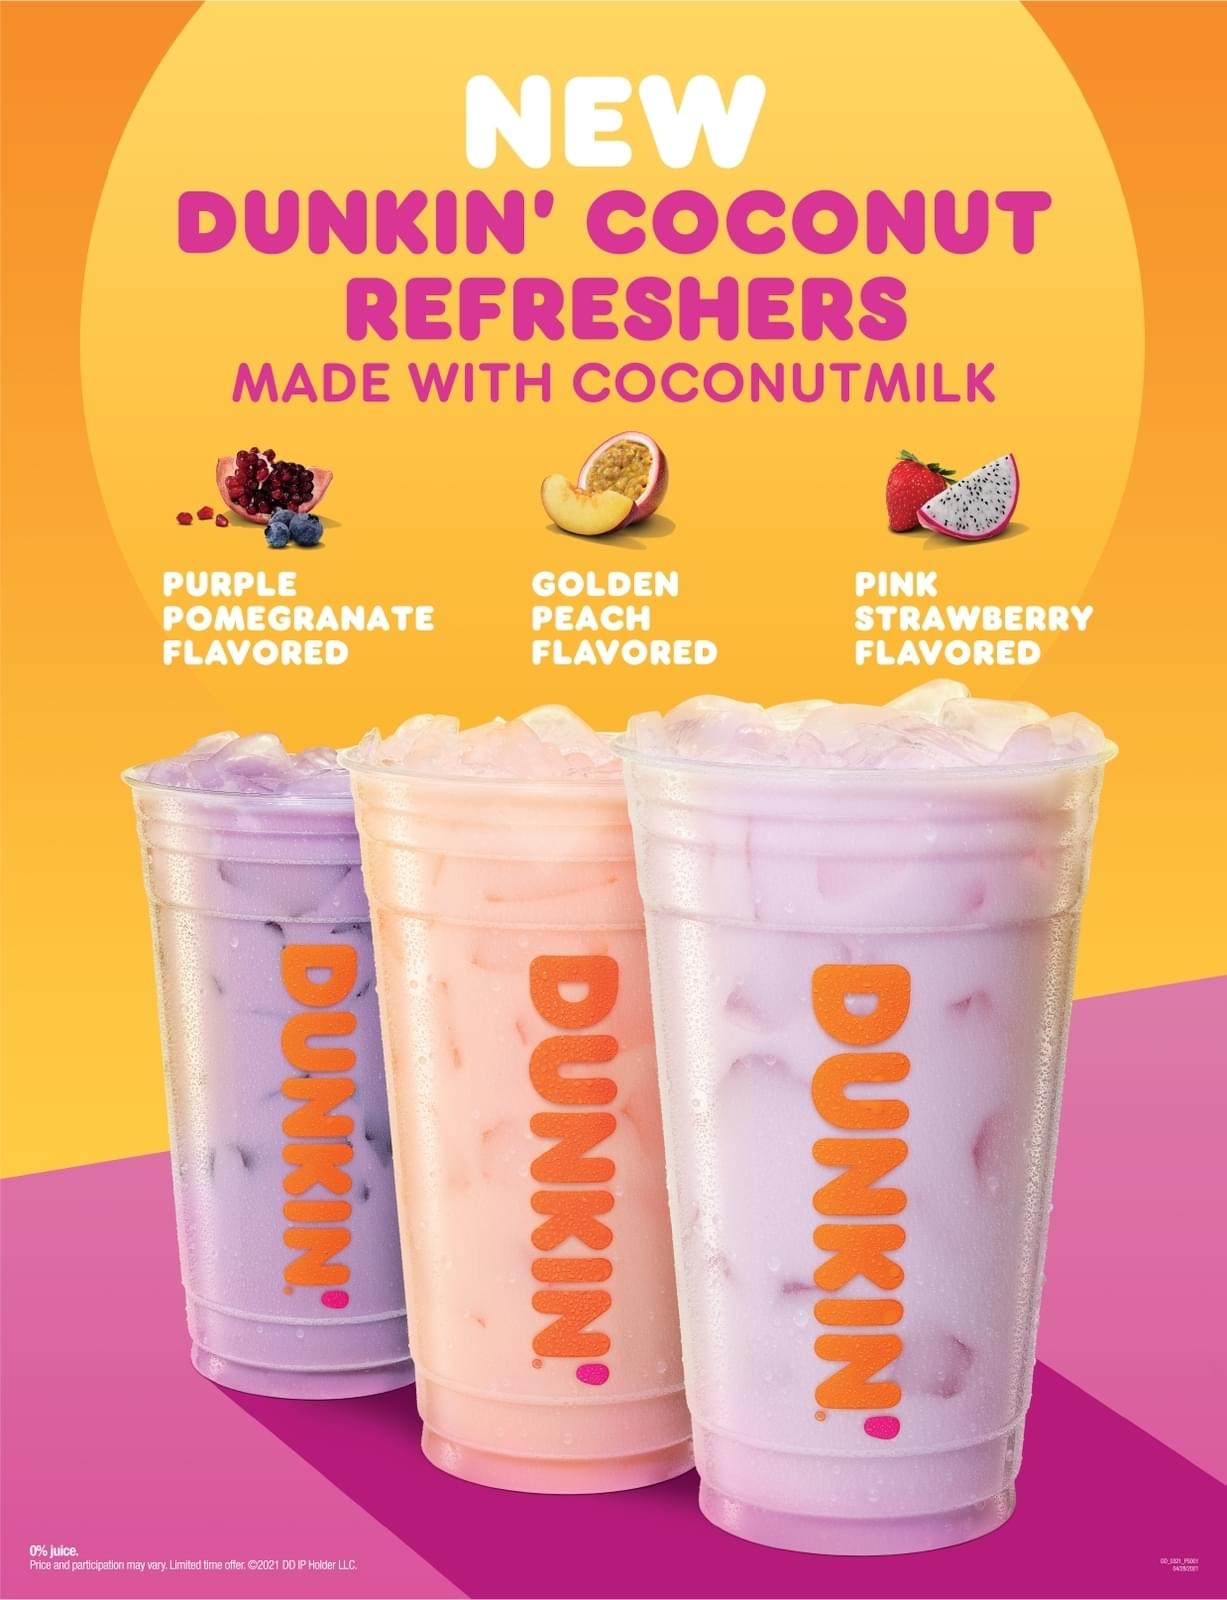 Dunkin Donuts Golden Peach Coconut Refreshers Medium Nutrition Facts